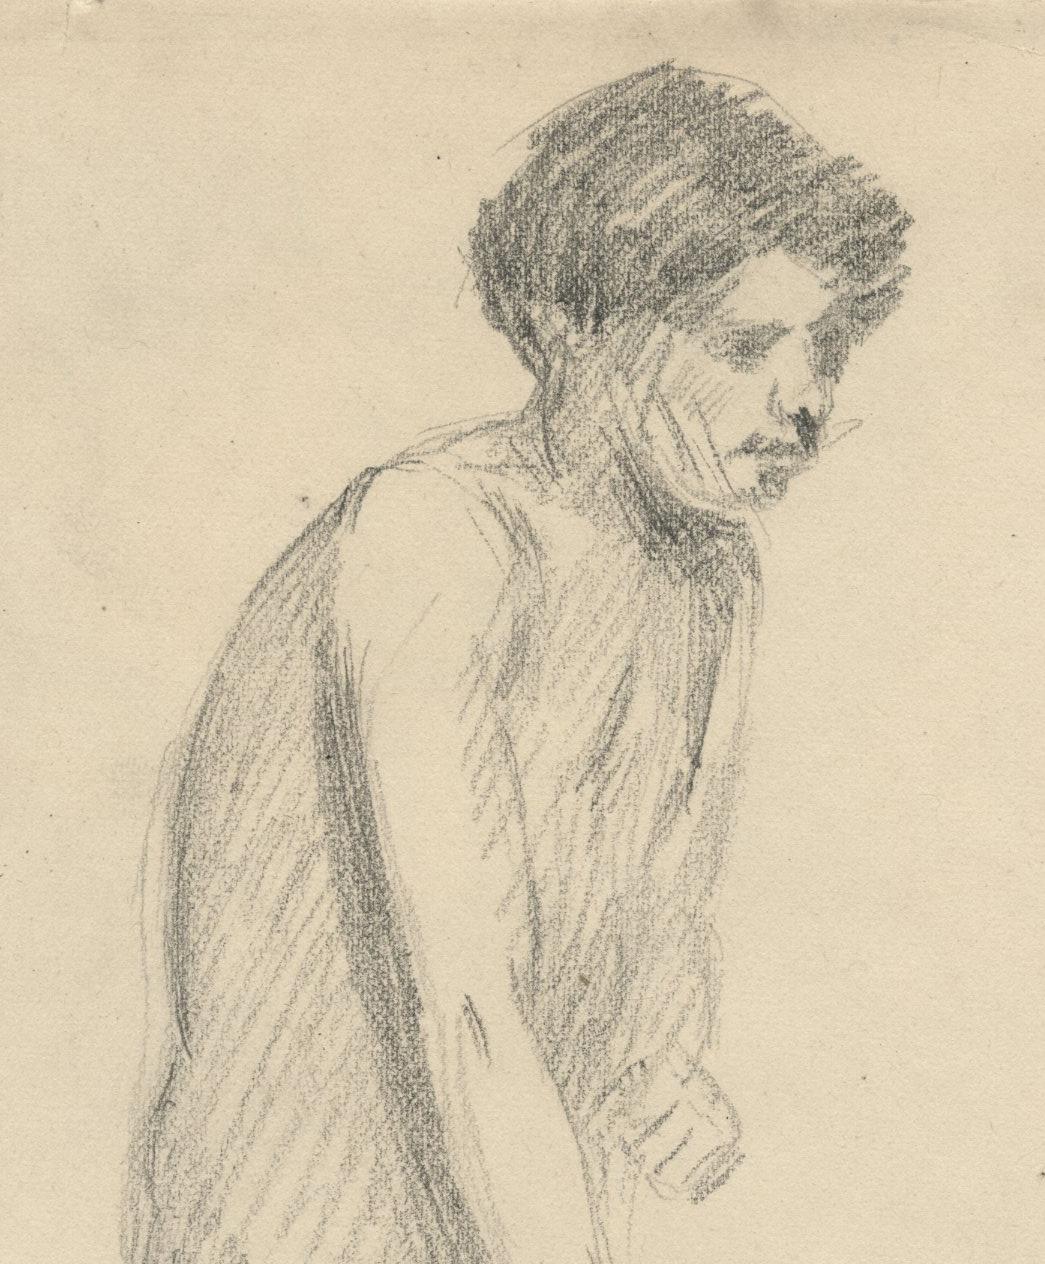 Standing Male Nude
Graphite on wove paper, c. 1890's
Unsigned
Sheet size: 9 5/16 x 6 inches
Provenance:
Rookwood Pottery Factory Collection, Cincinnati
Ira Spanierman, New York (label)

Drawings from the sketchbook are in the collections of the